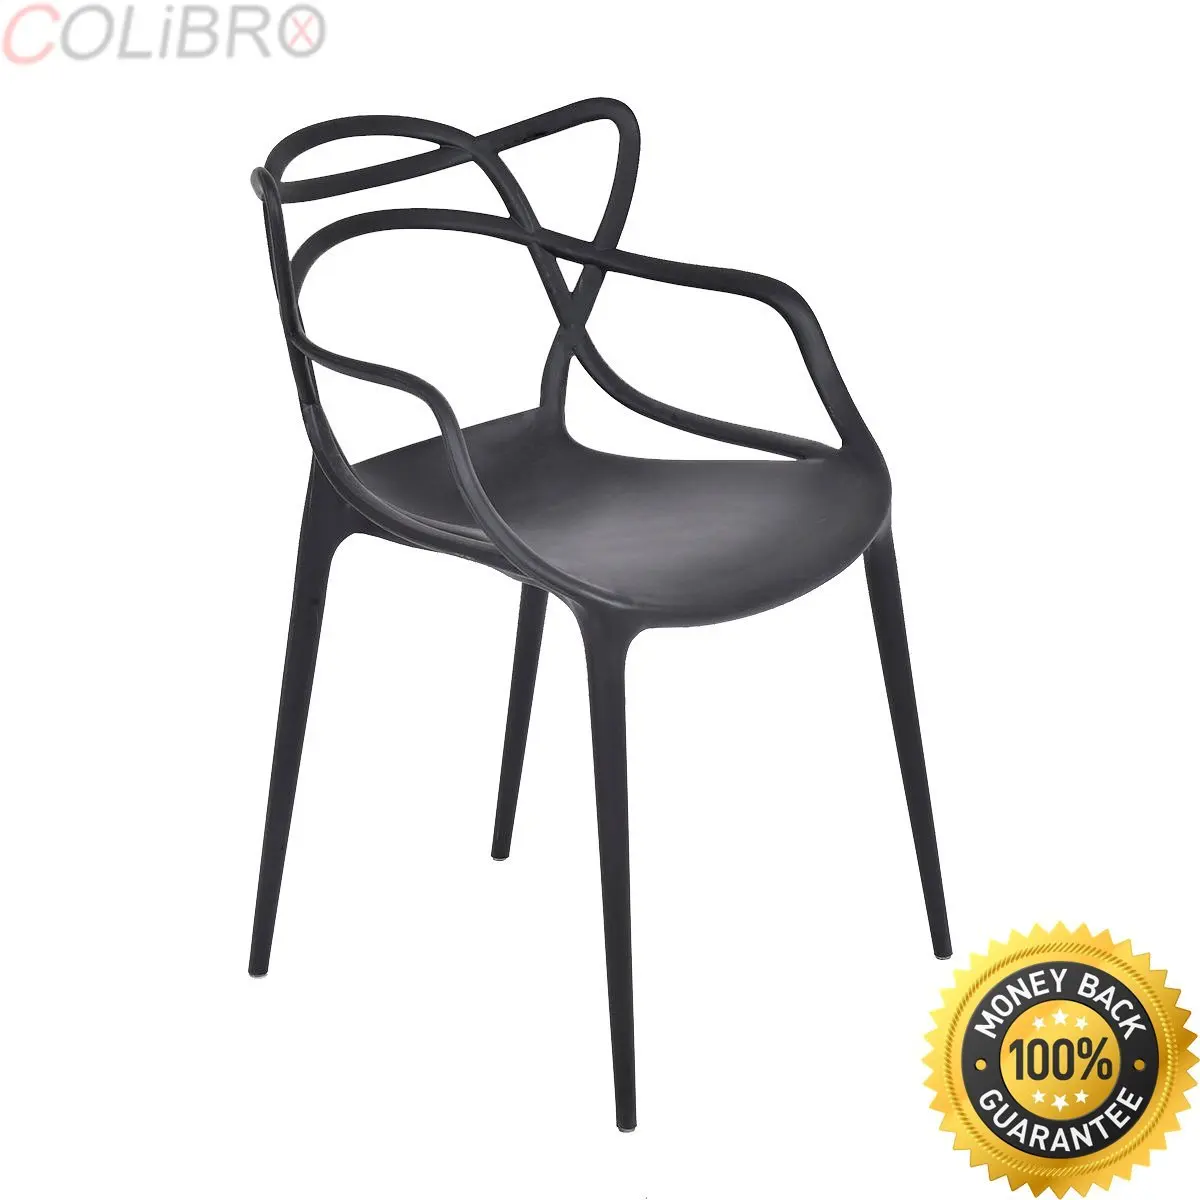 Cheap Low Price Pvc Single Dining Chairs Find Low Price Pvc Single Dining Chairs Deals On Line At Alibaba Com